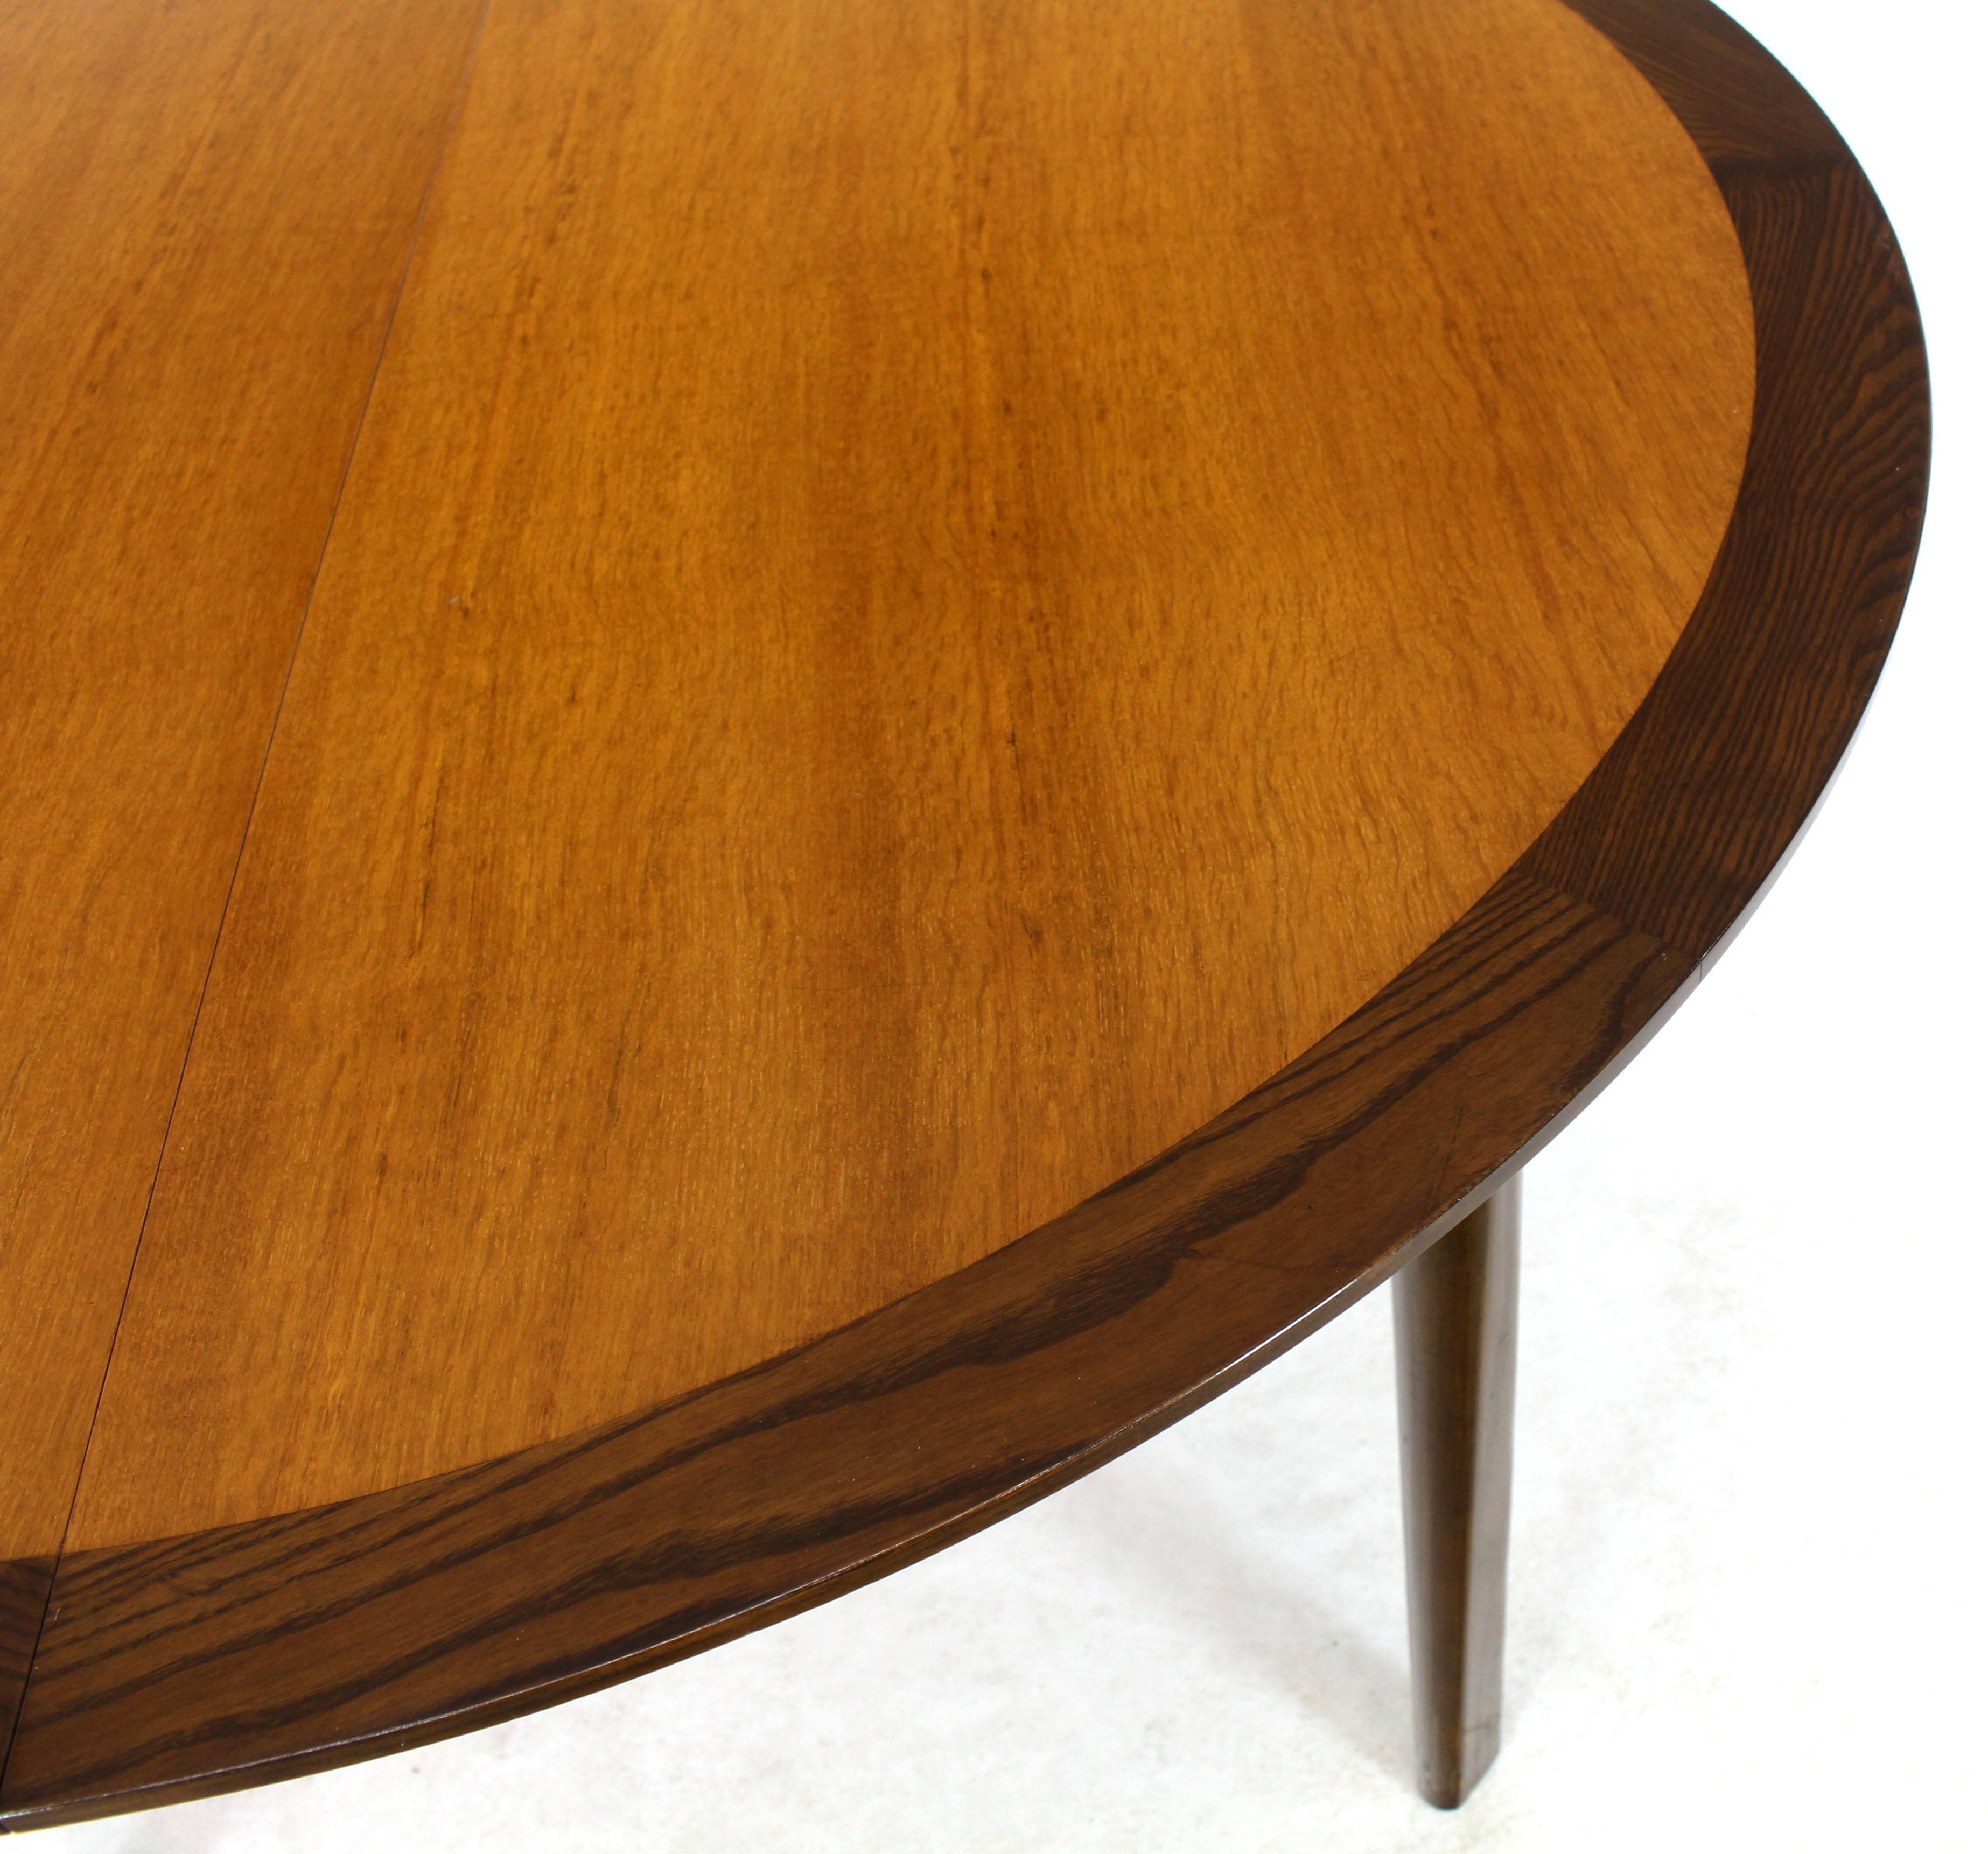 2 tone dining table